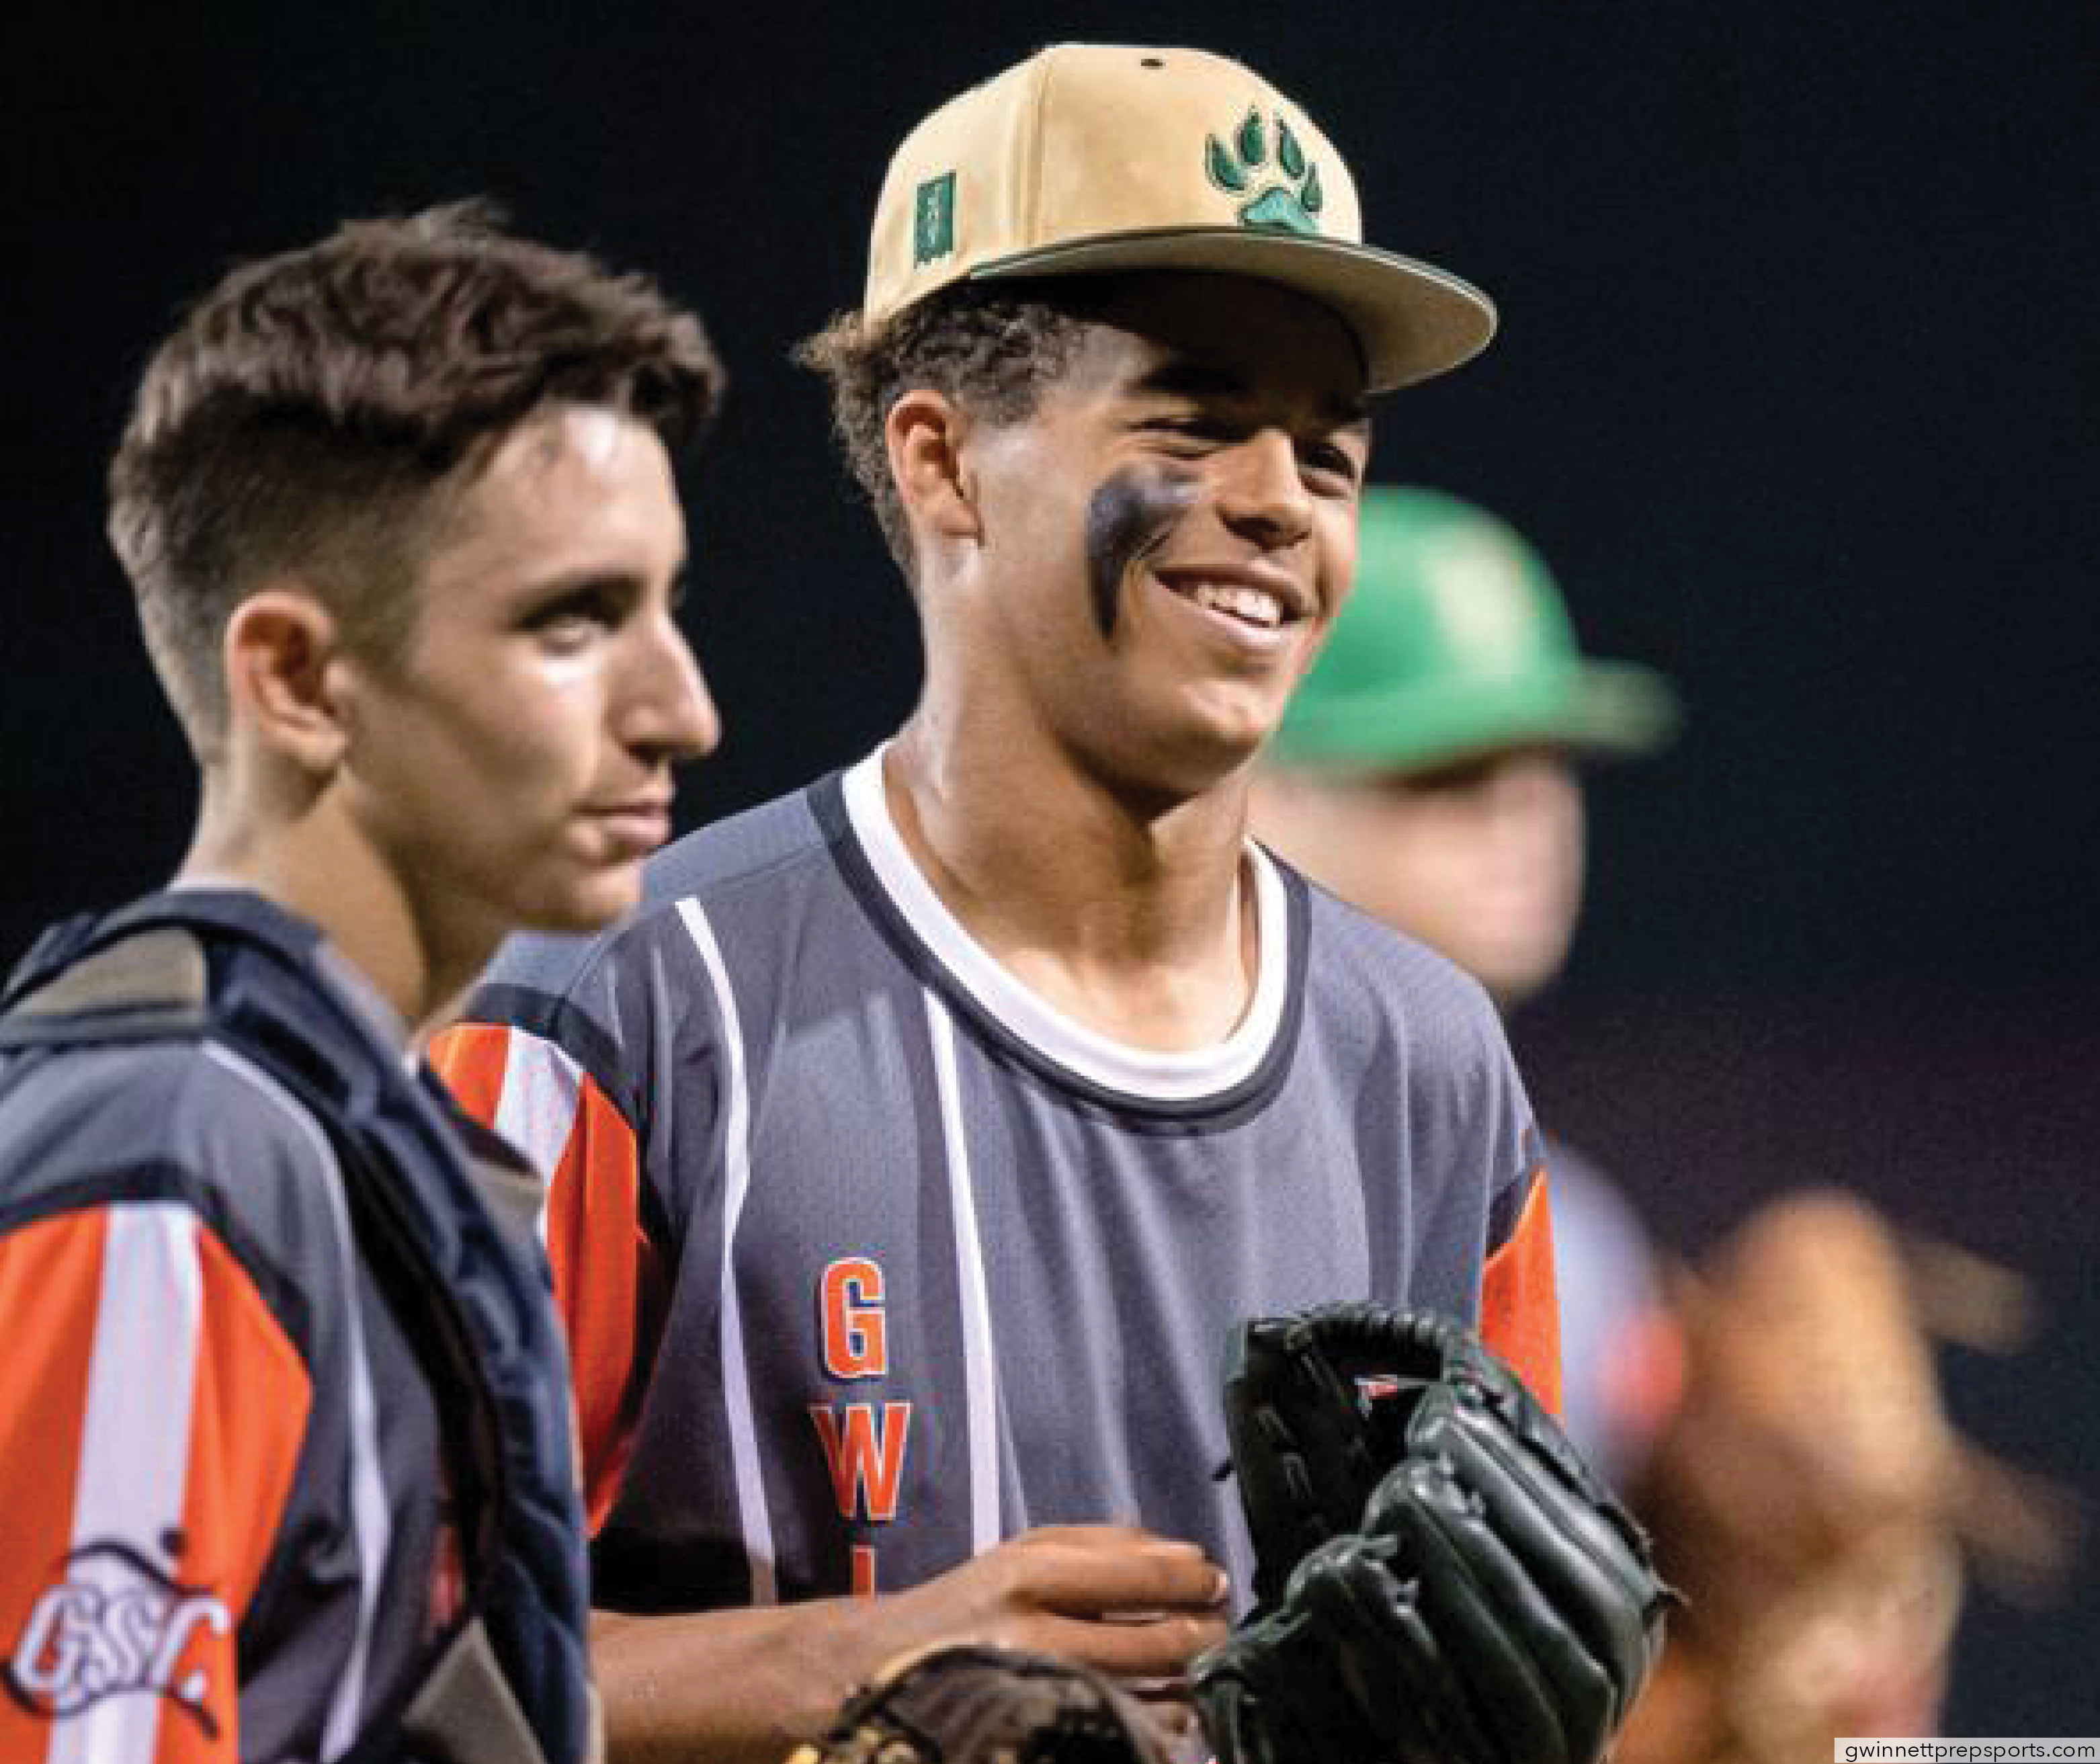 Andruw Jones' Son Among Top Prospects in Class of 2022